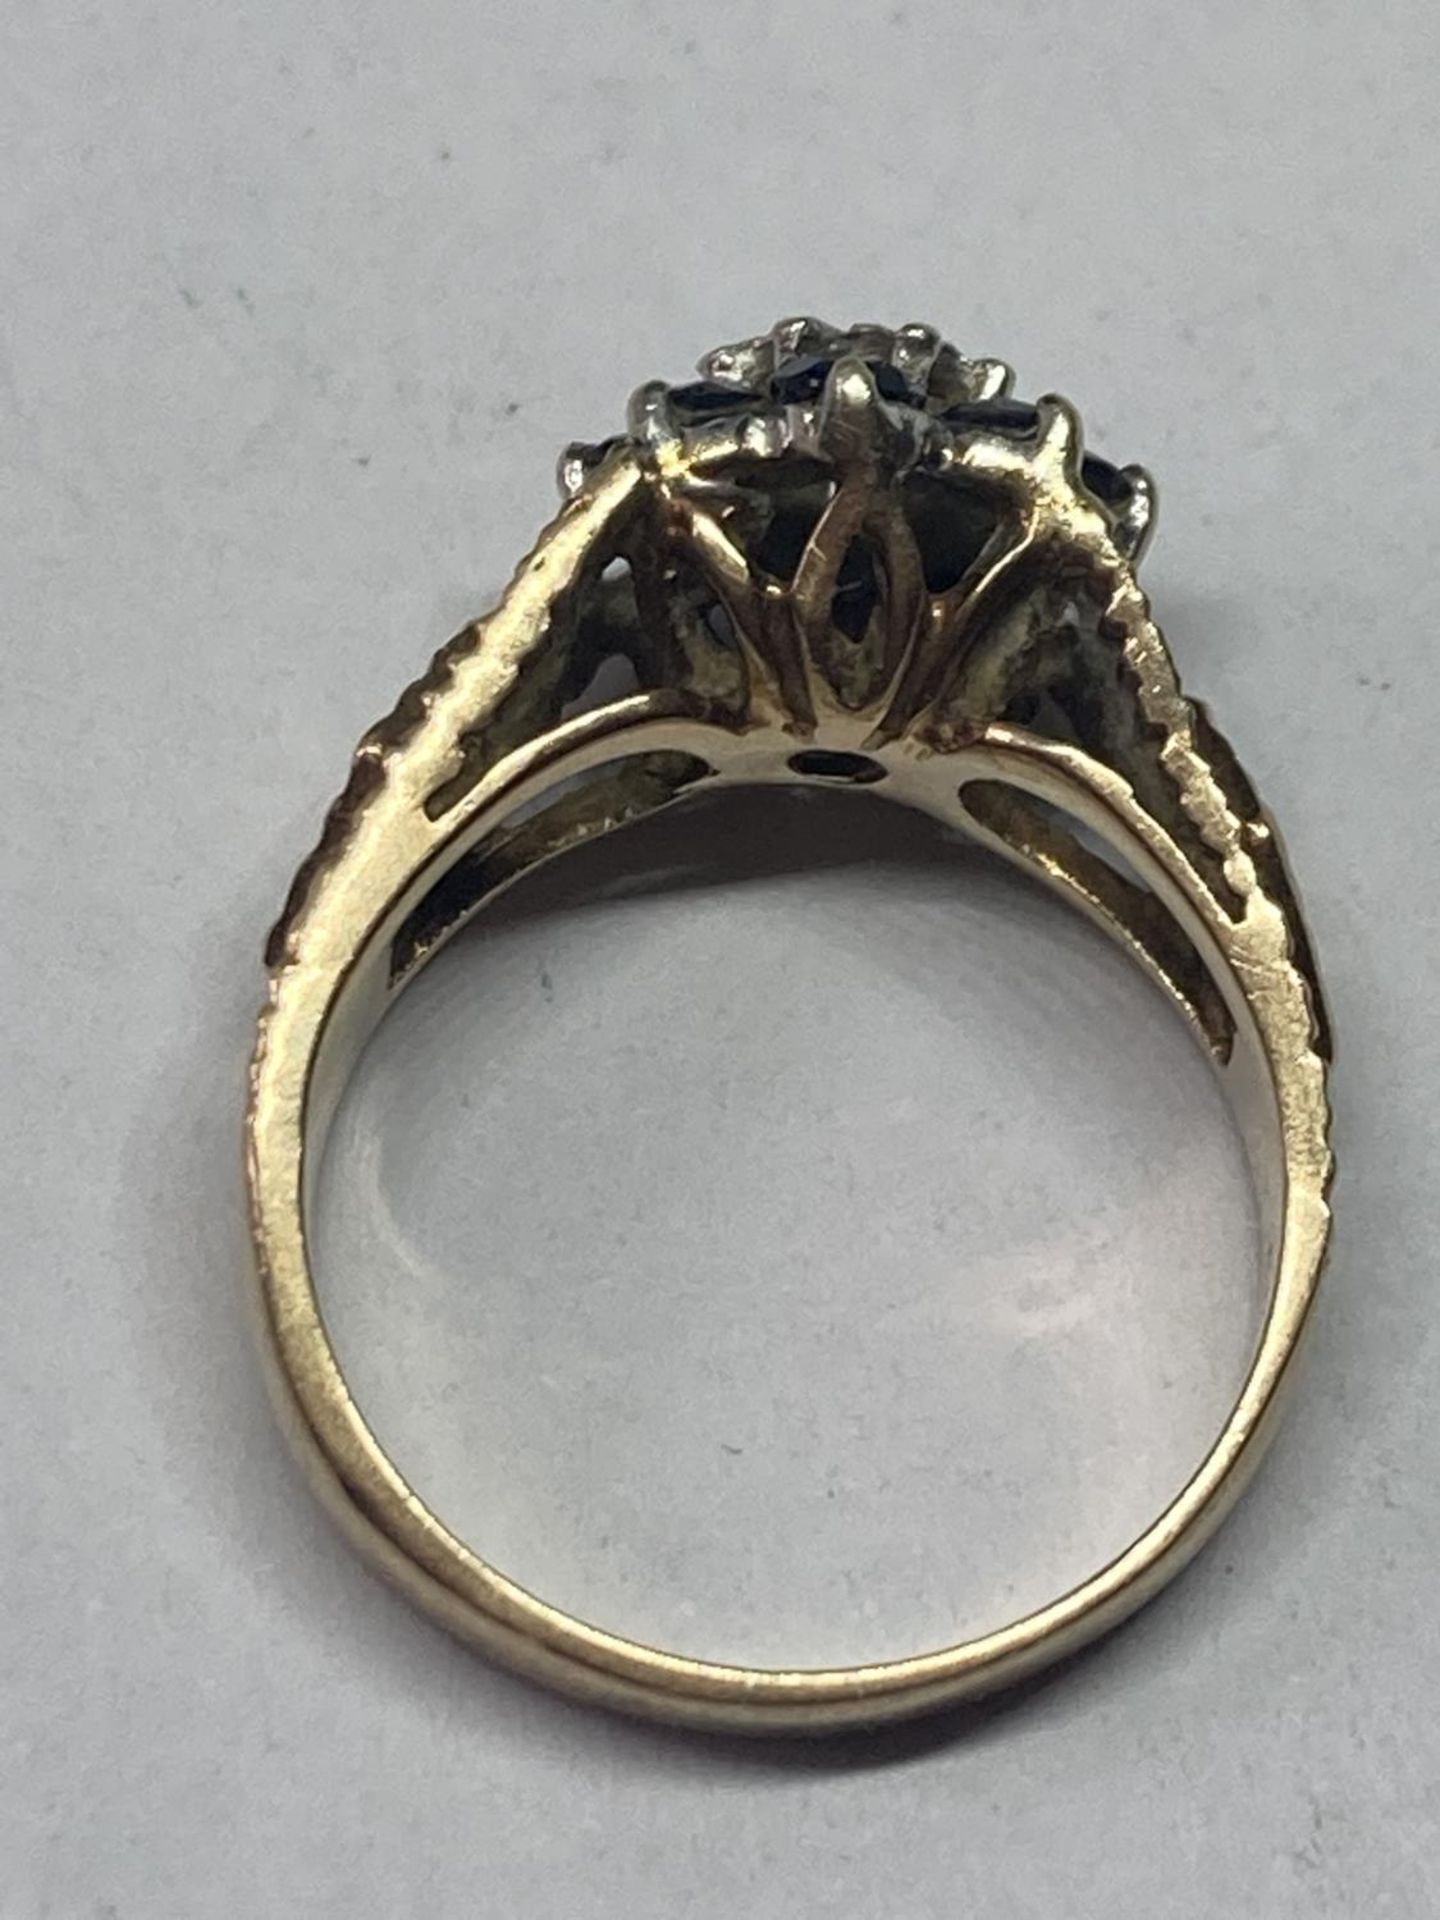 A 9 CARAT GOLD RING WITH CENTRE DIAMOND SURROUNDED BY SAPPHIRES SIZE J - Image 3 of 3